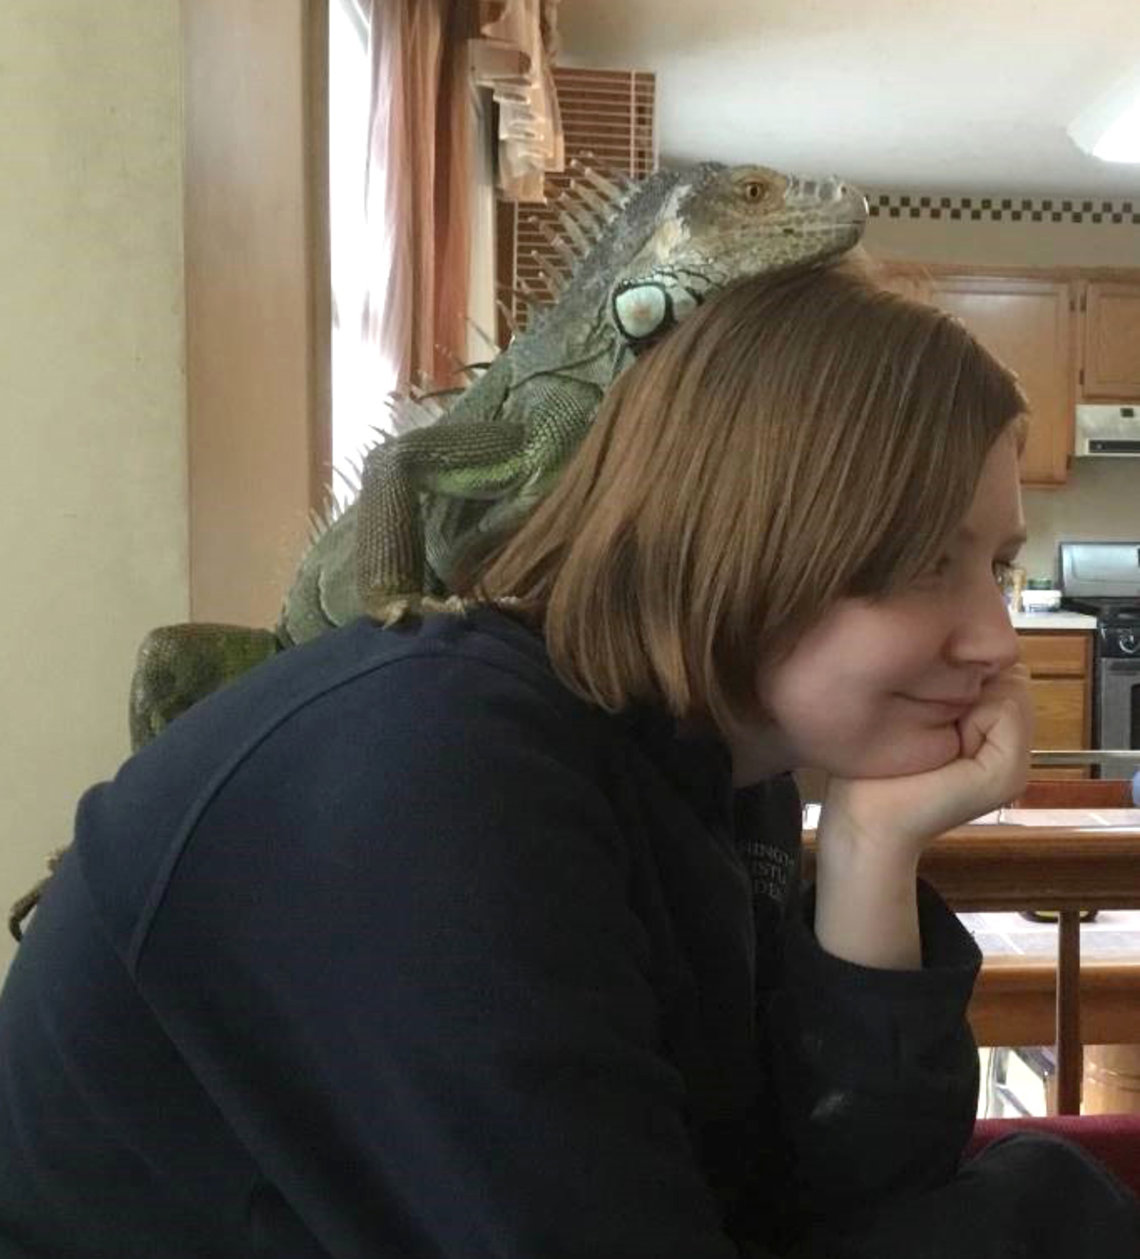 An iguana sits on top of a girl's head in her home.